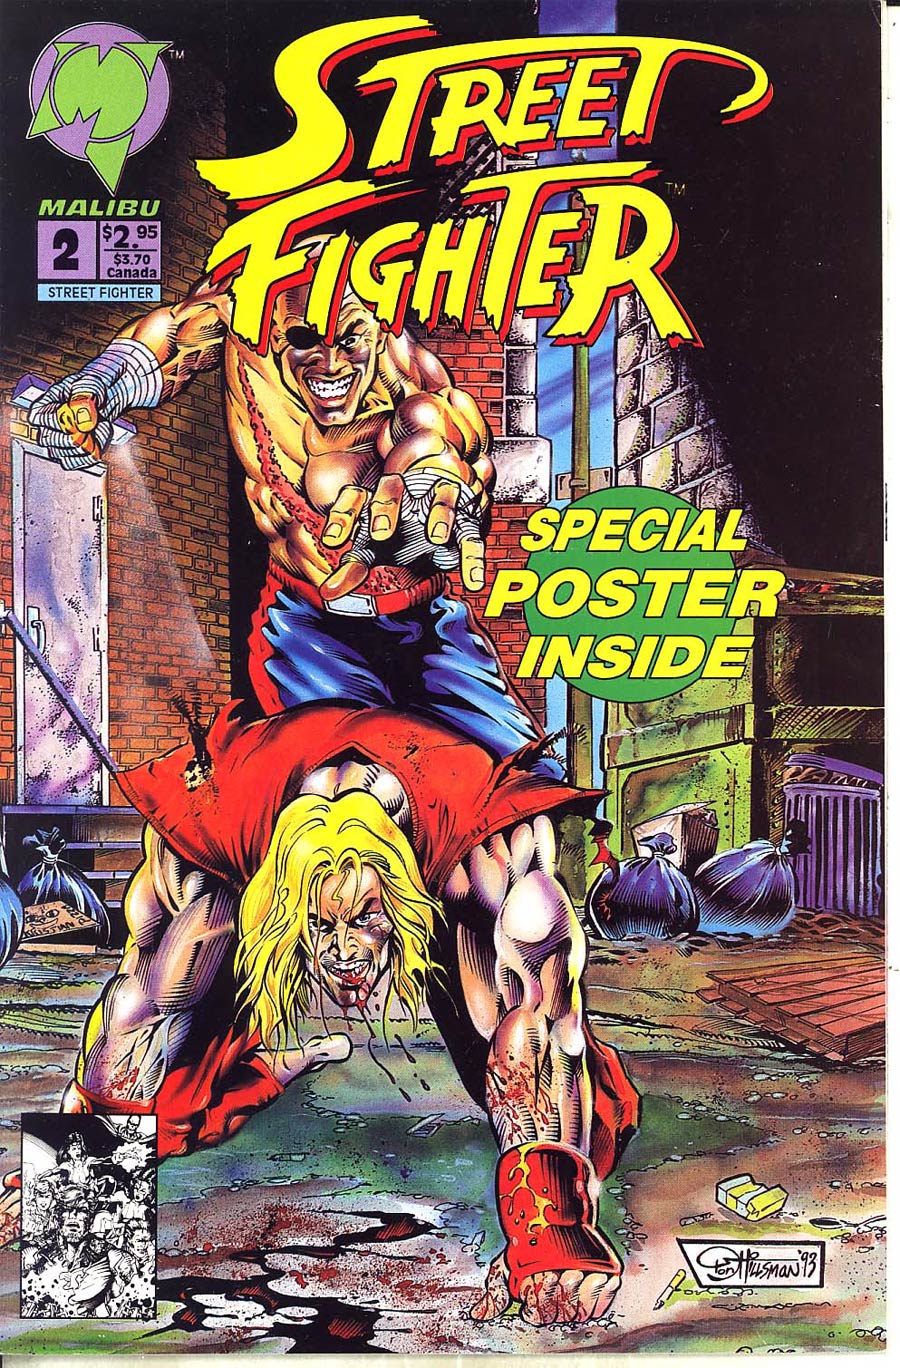 Street Fighter (Malibu) #2 Cover B Without Polybag and Poster